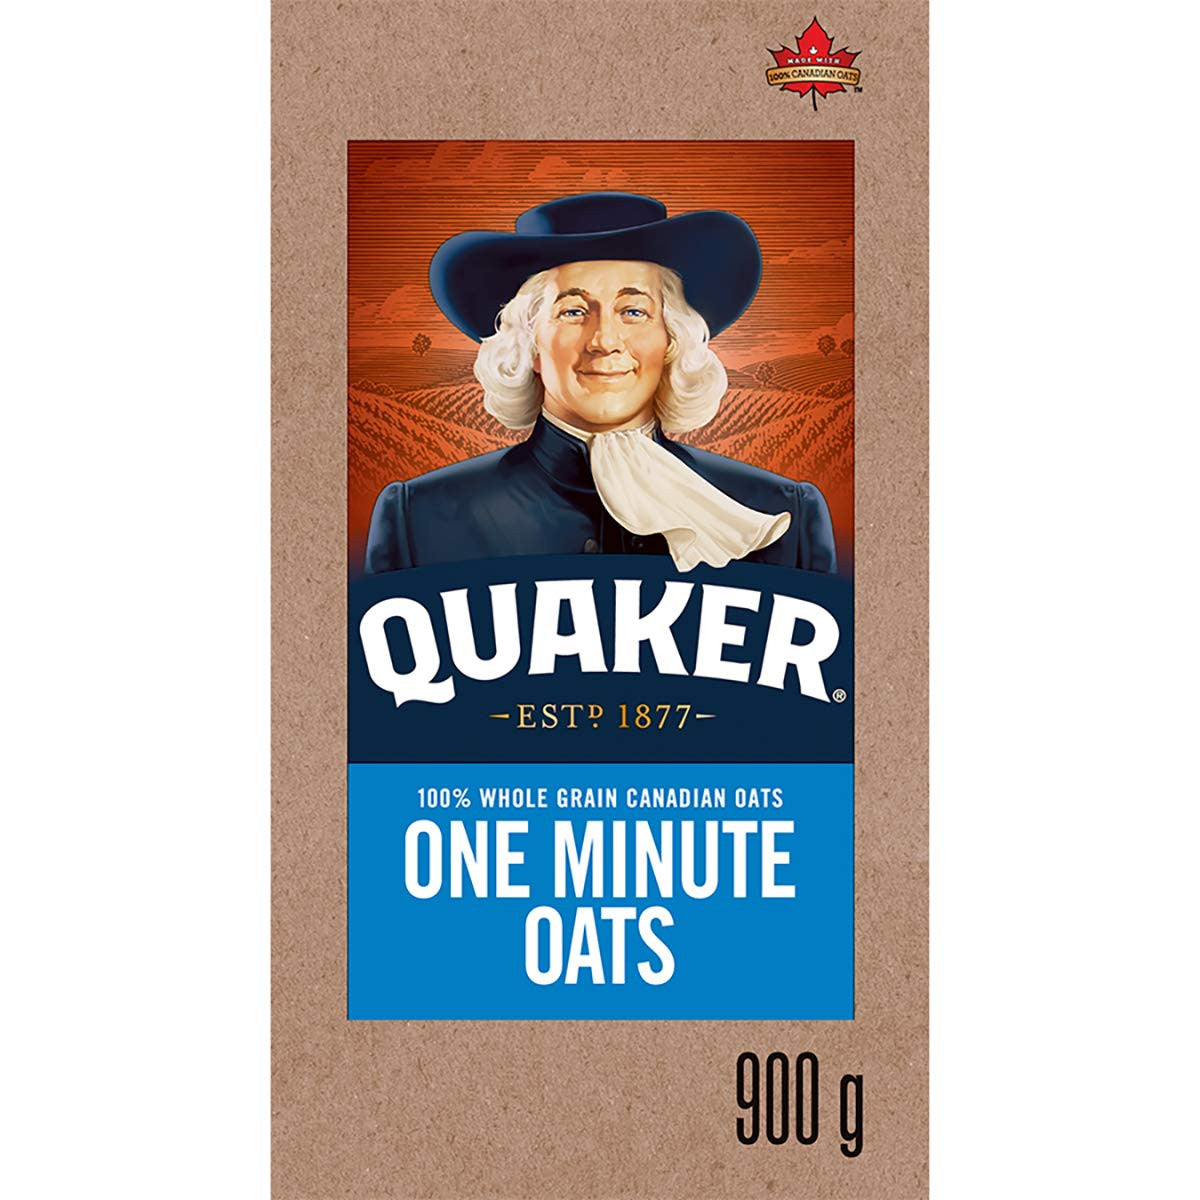 Quaker One Minute Oats 900g/31.7 oz {Imported from Canada}